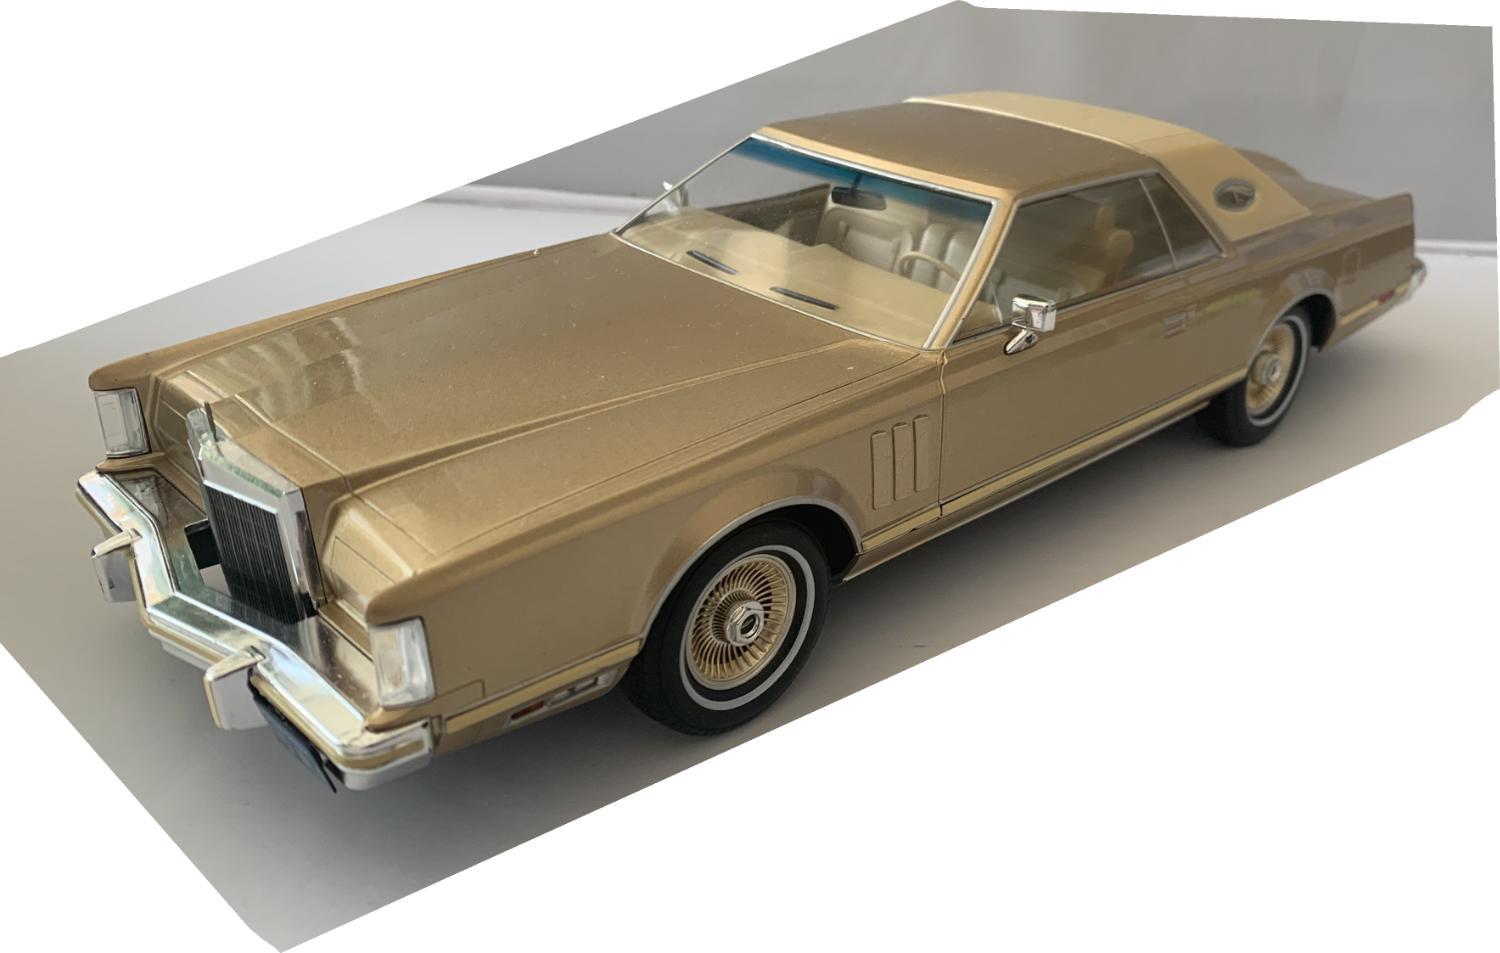 An excellent scale model of the Lincoln Continental mk 5 with high level of detail throughout, all authentically recreated.  Model is presented on a removable plinth in a window display box. The car is approx. 32 cm long and the presentation box is 40.5 cm long